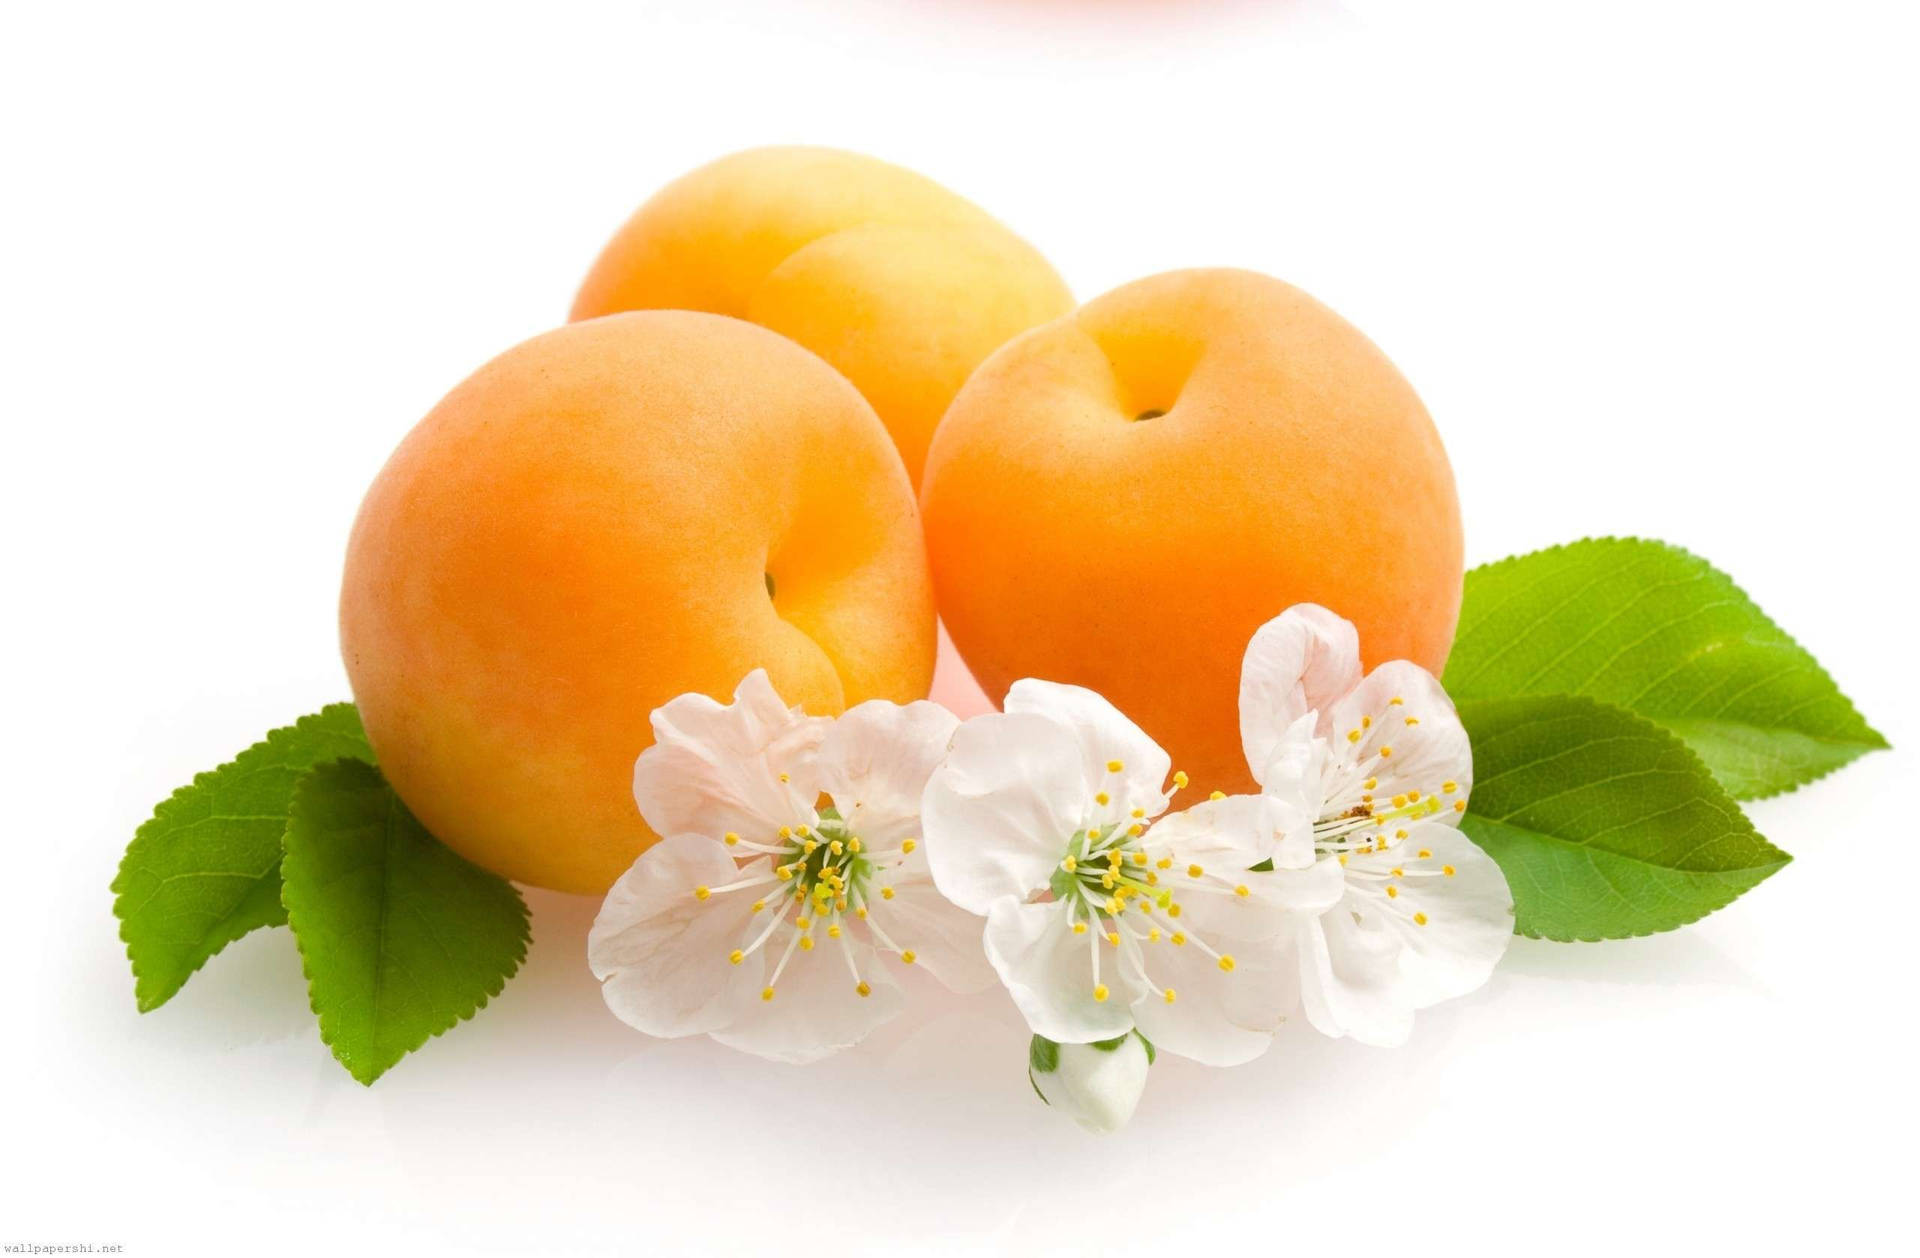 Apricot Fruits And Flowers Wallpaper